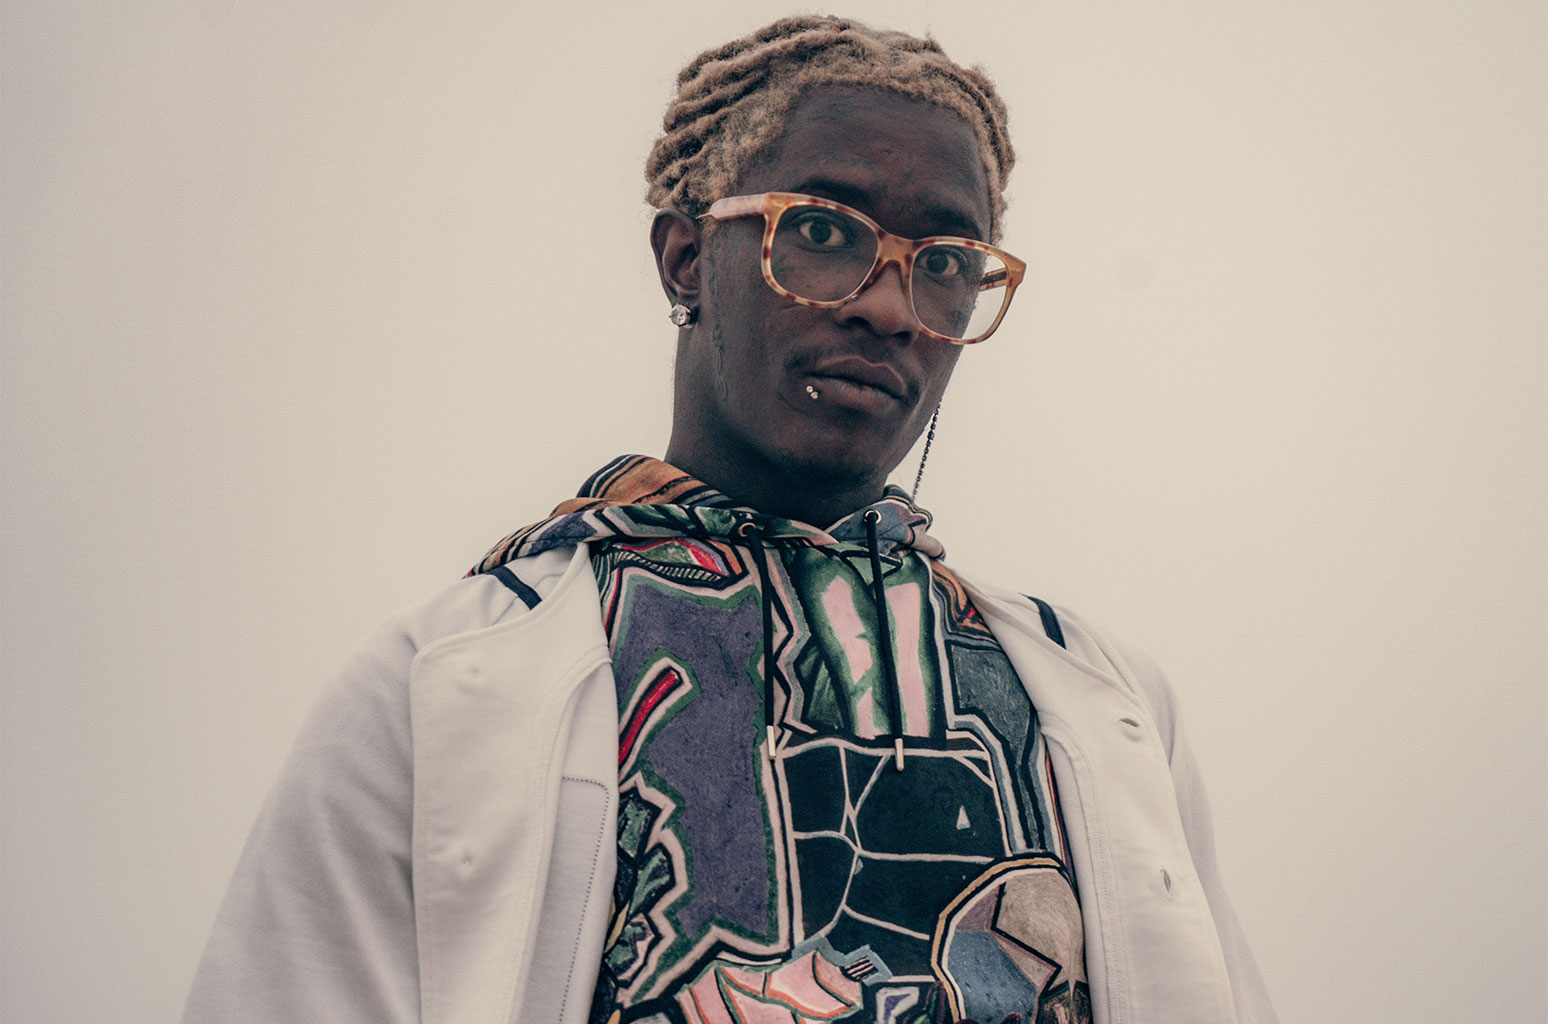 Here's Which University Won $25,000 in Young Thug's 'Hot' Battle of the Bands Challenge